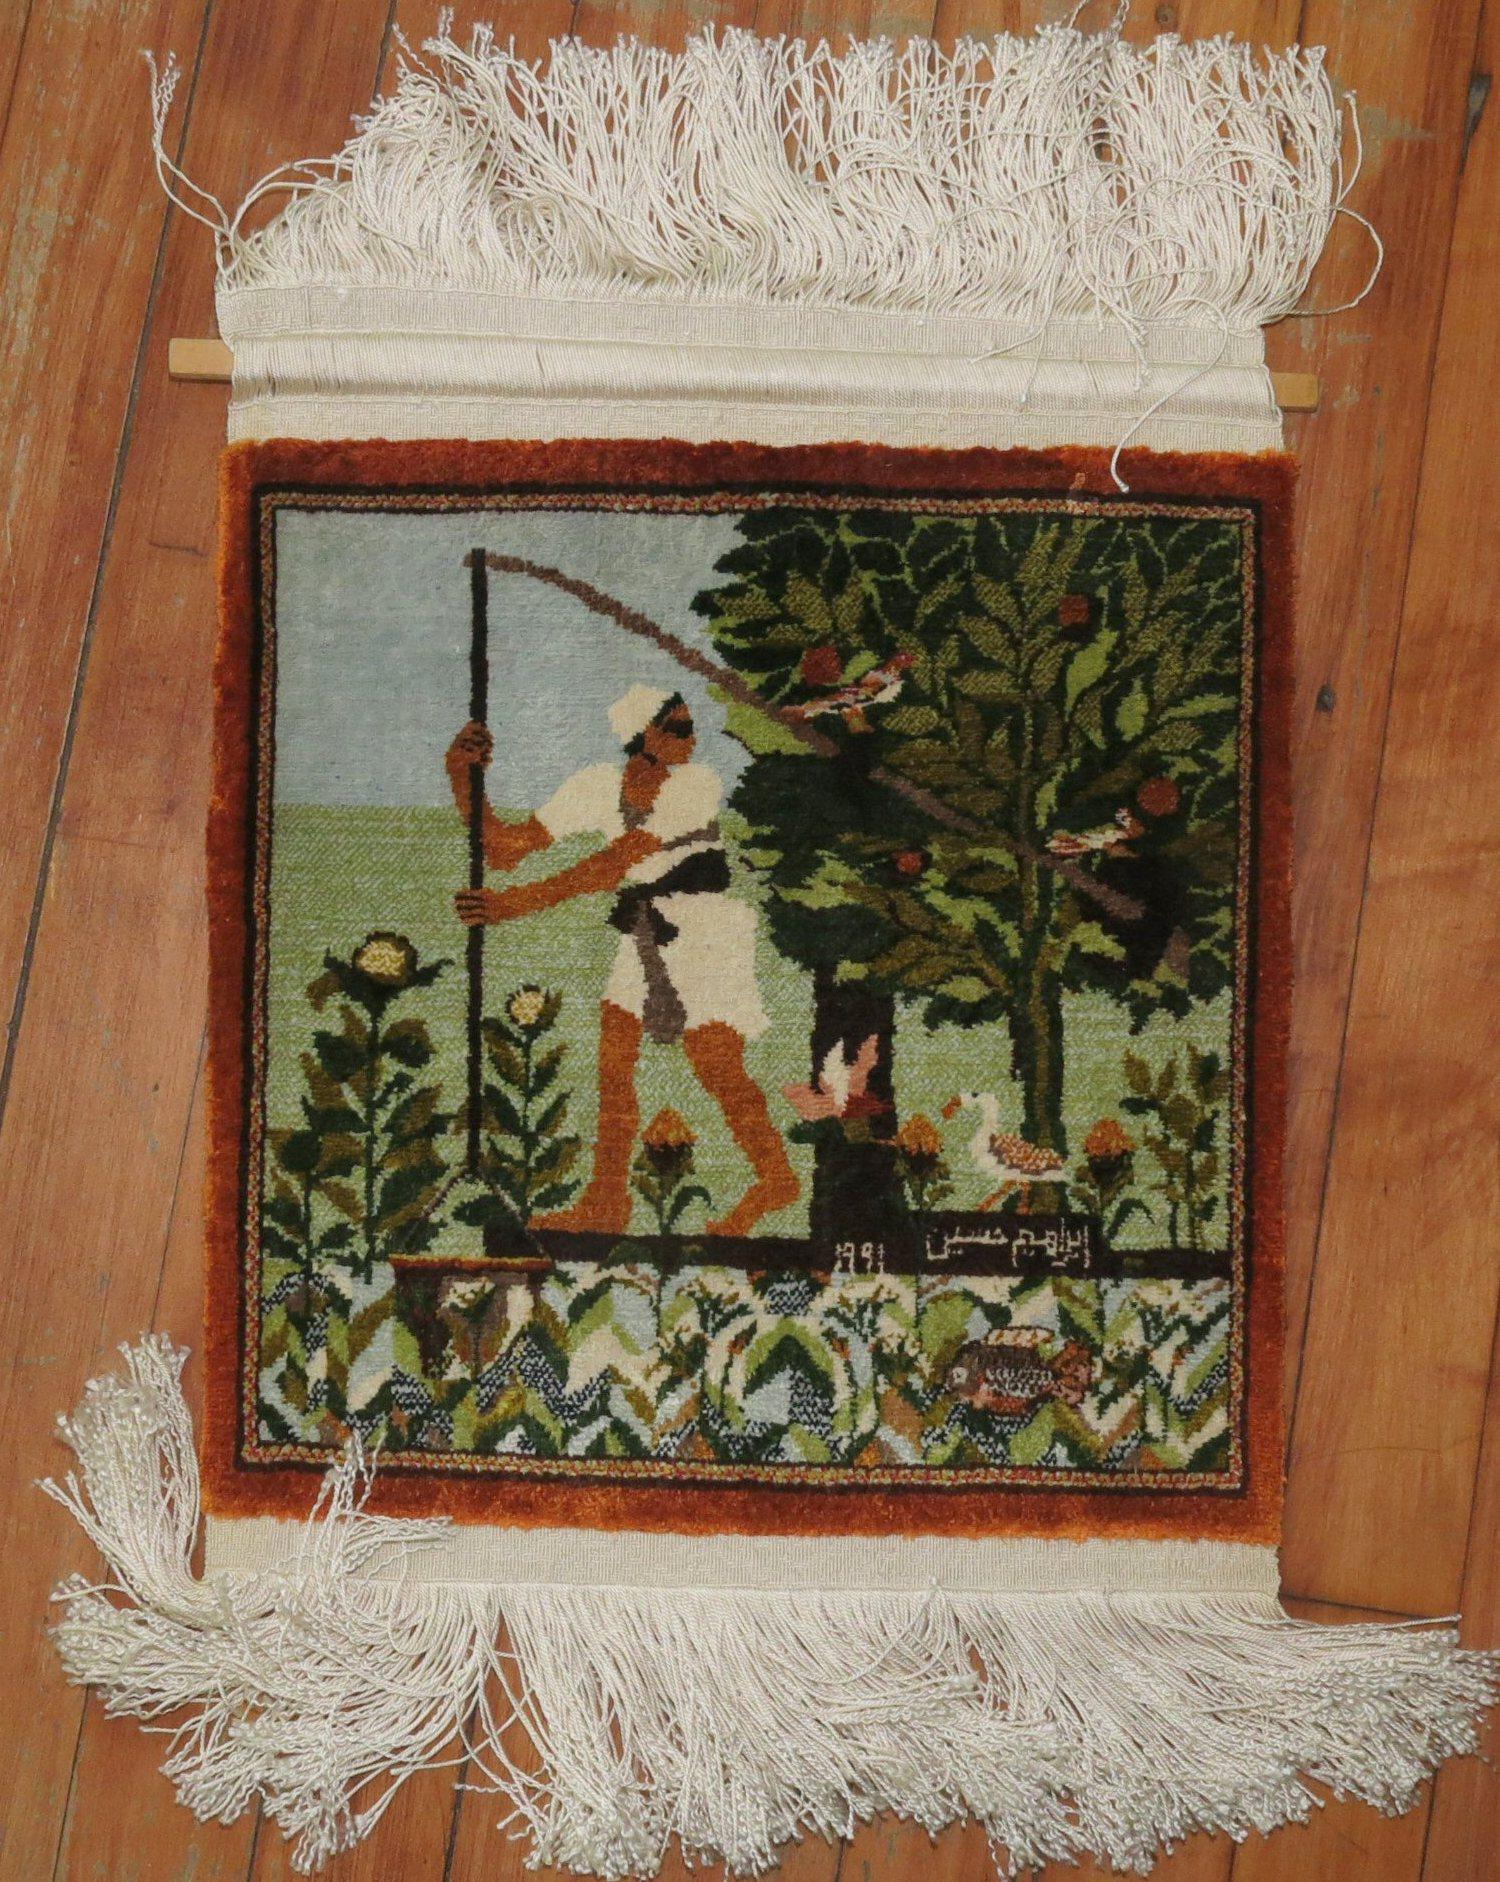 Silk Persian rug with a man holding a stick with 2 birds hanging on. A Duck is right behind. Signed by weaver, dated 1991. The fringes are quite long. Can be trimmed if needed.
Measures: 13” x 13”.